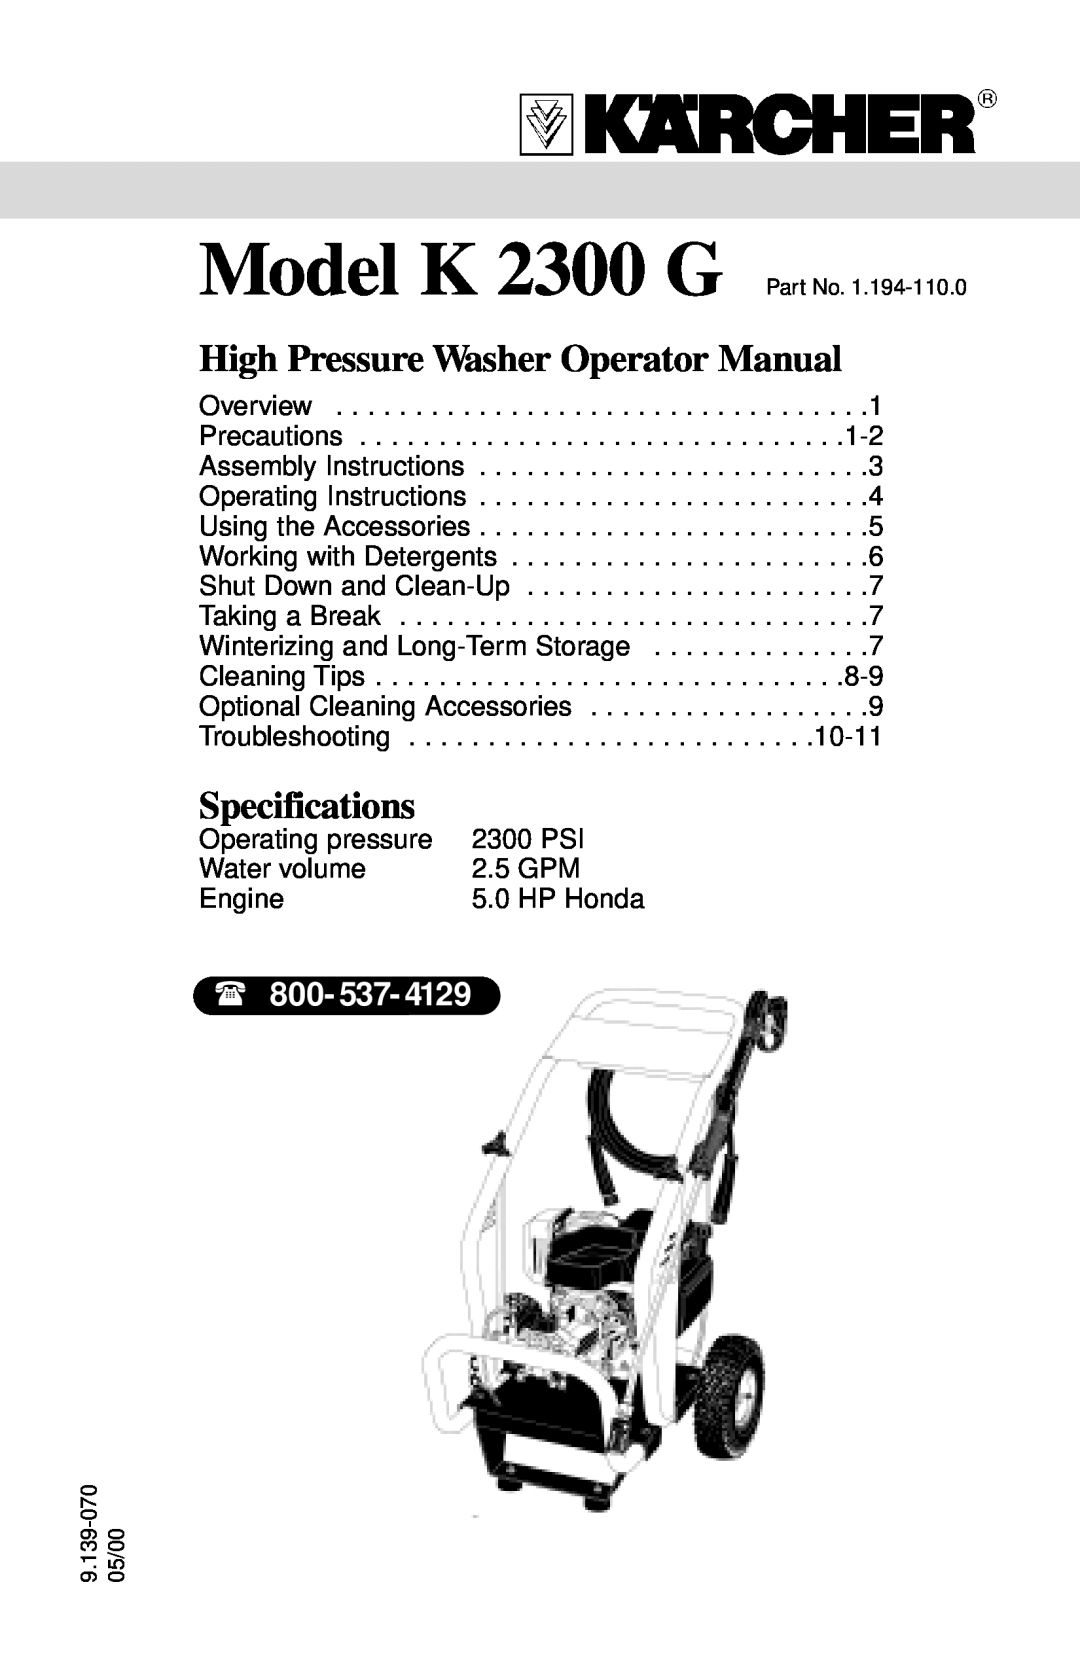 Karcher K 2300 G specifications 800- 537, High Pressure Washer Operator Manual, Specifications 